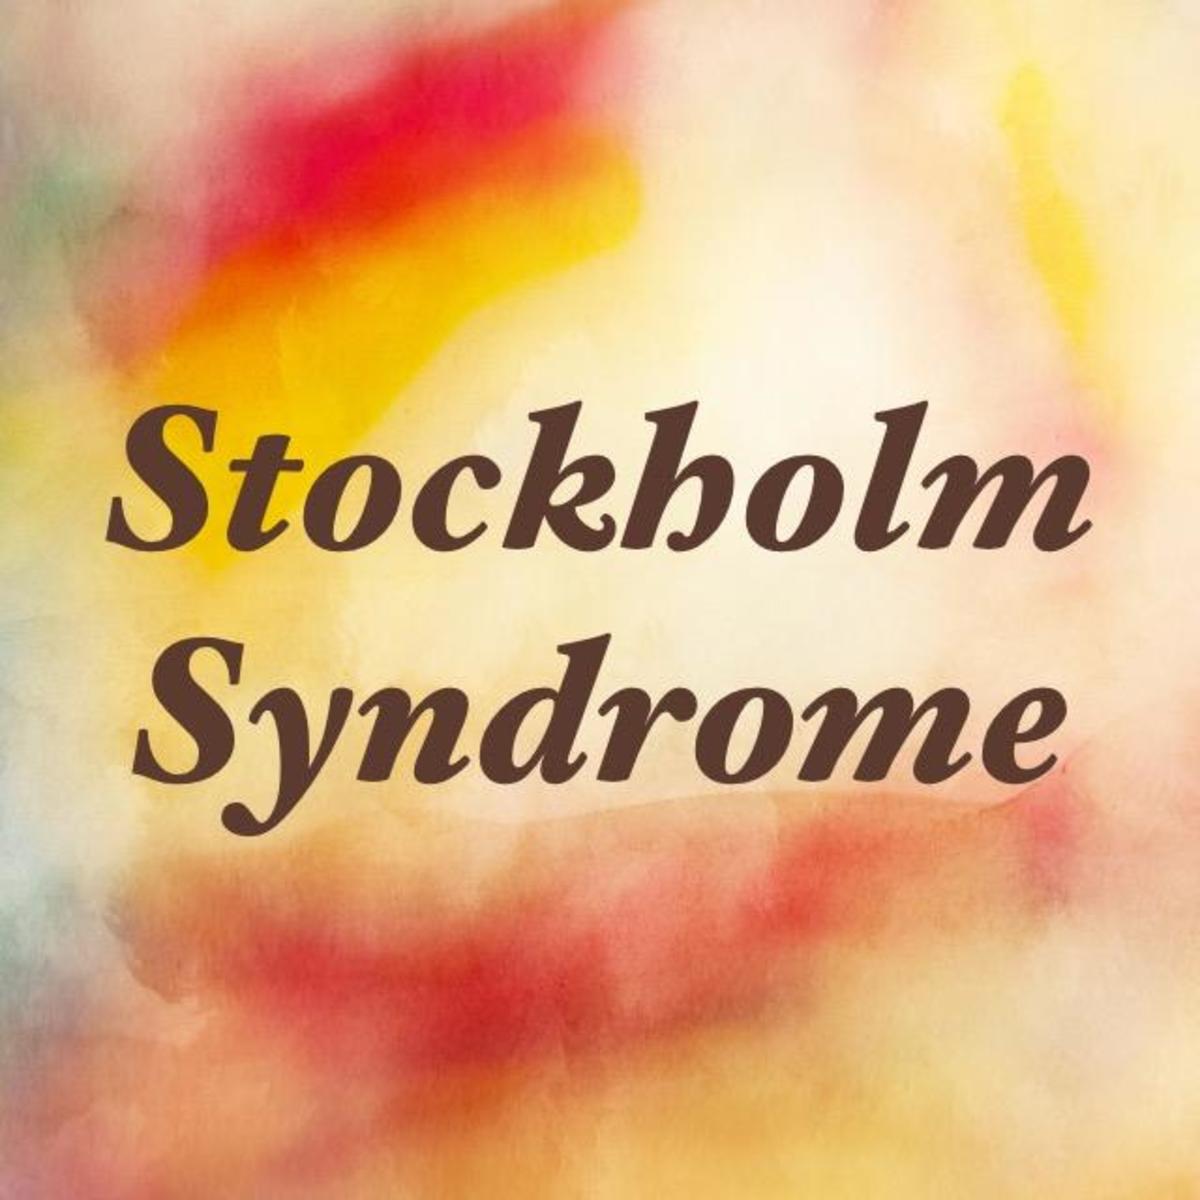 Stockholm Syndrome and Other Related Hostage Syndromes